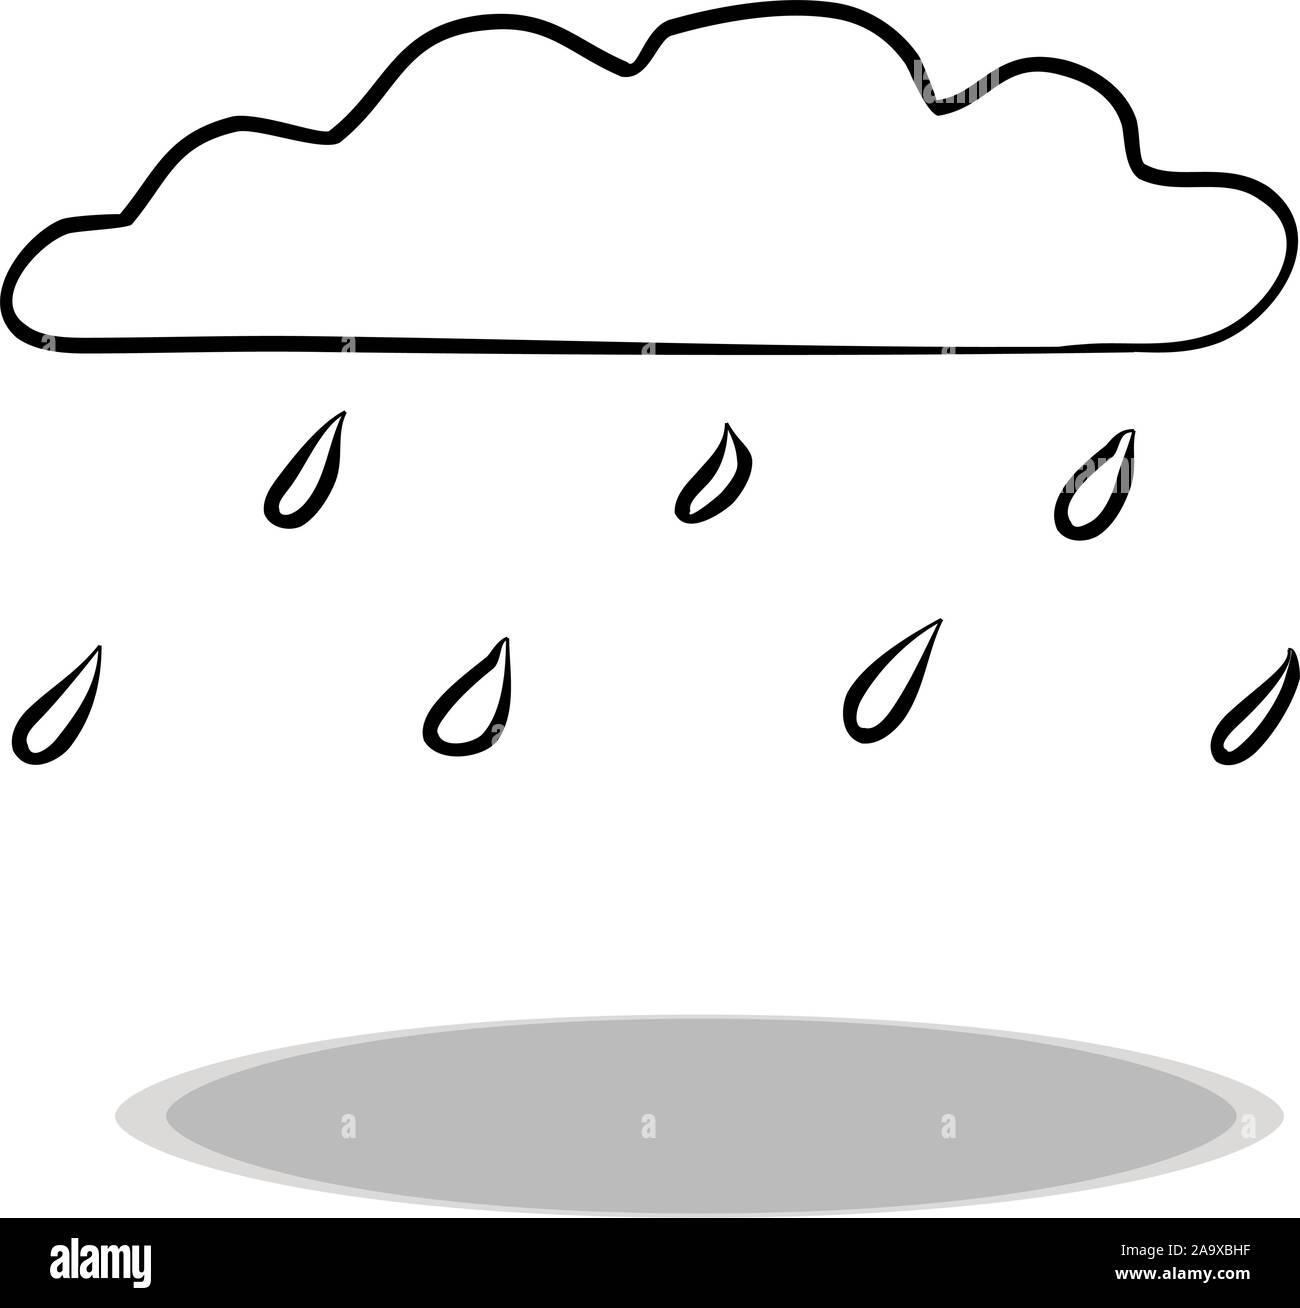 Rain icon on white background, flat design, hand drawing. Illustration cloud, contour of symbol Stock Vector